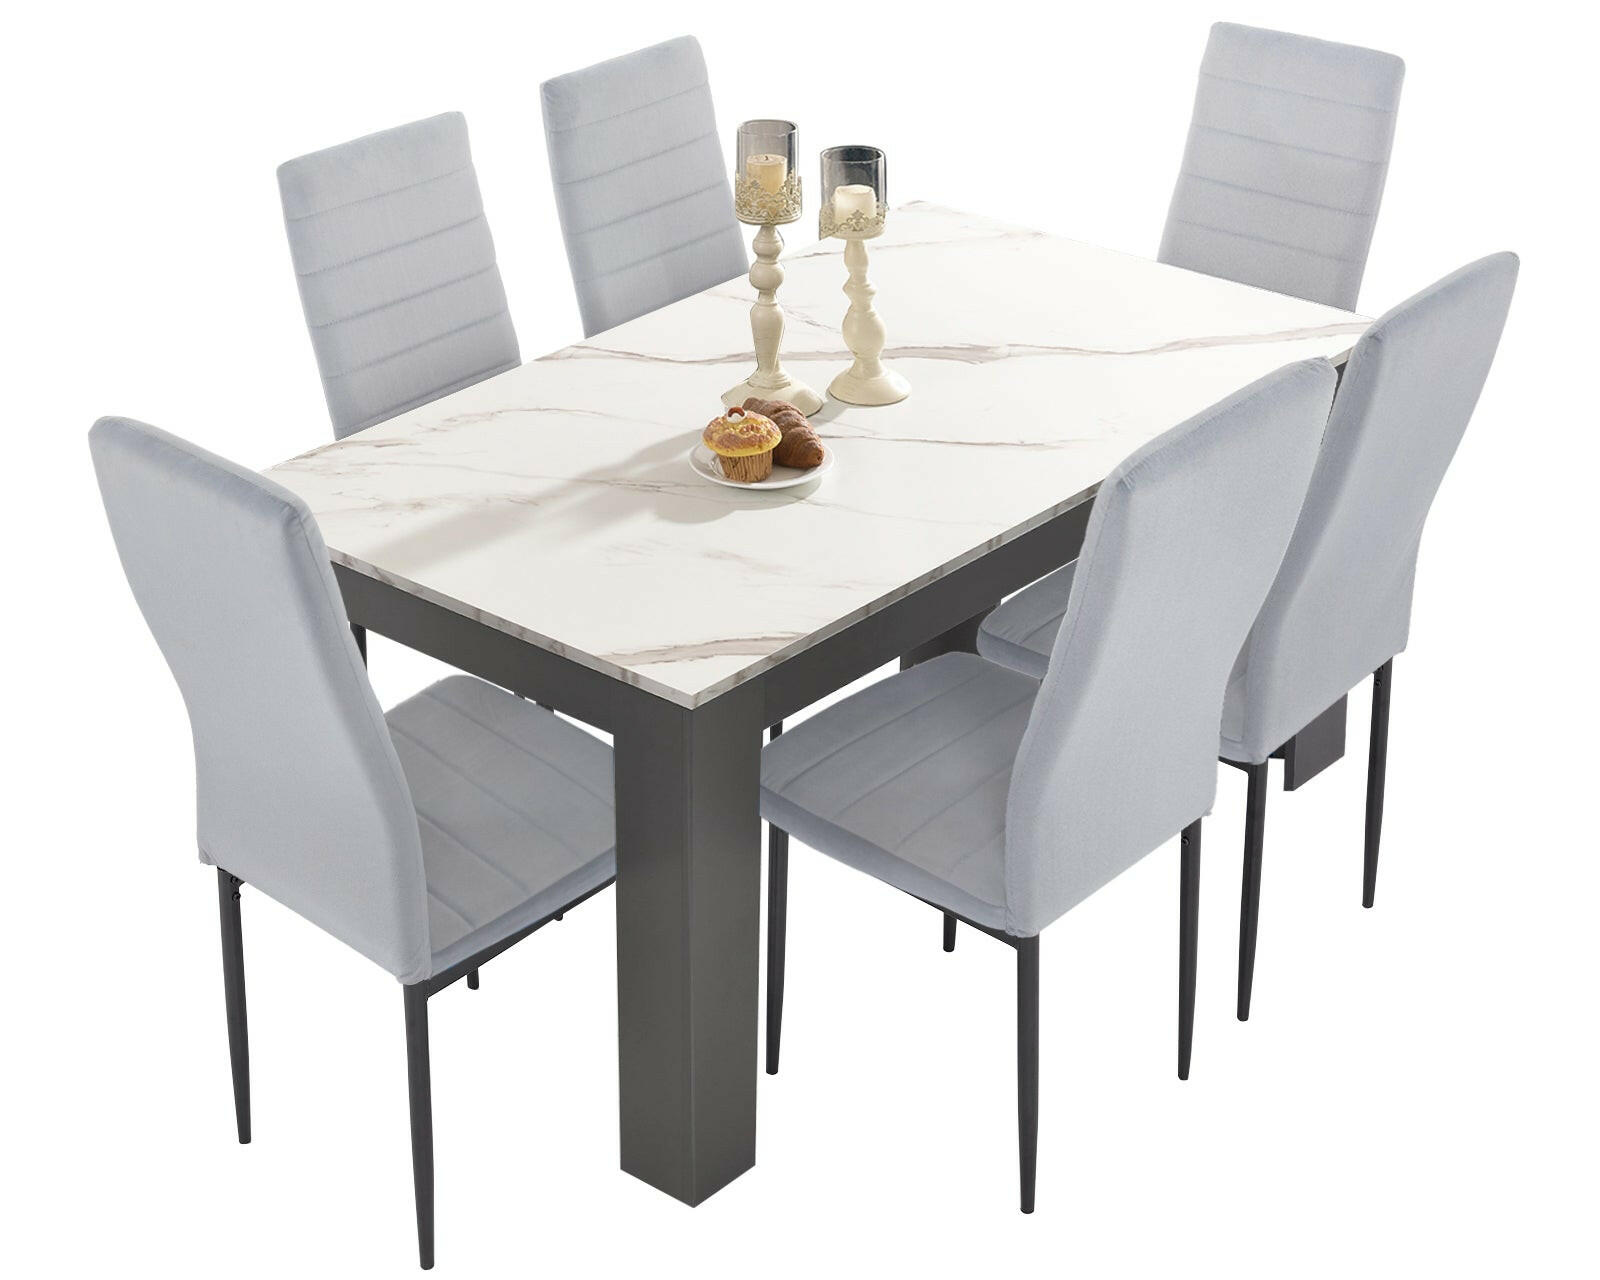 dining chairs set of 6